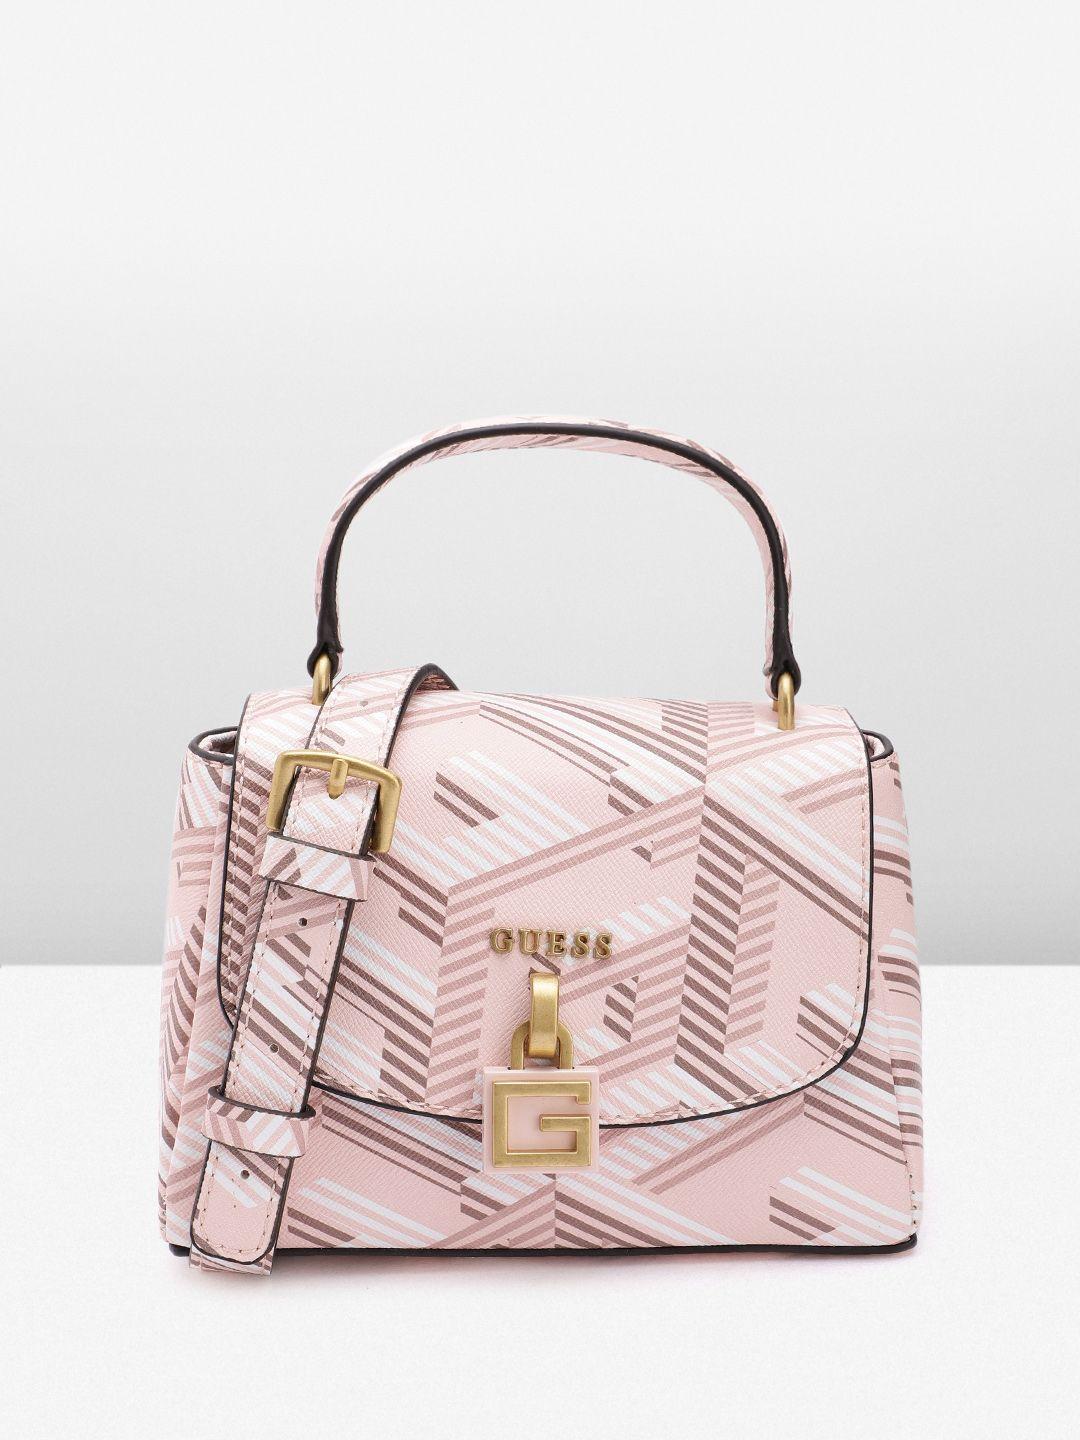 guess brand logo printed structured satchel